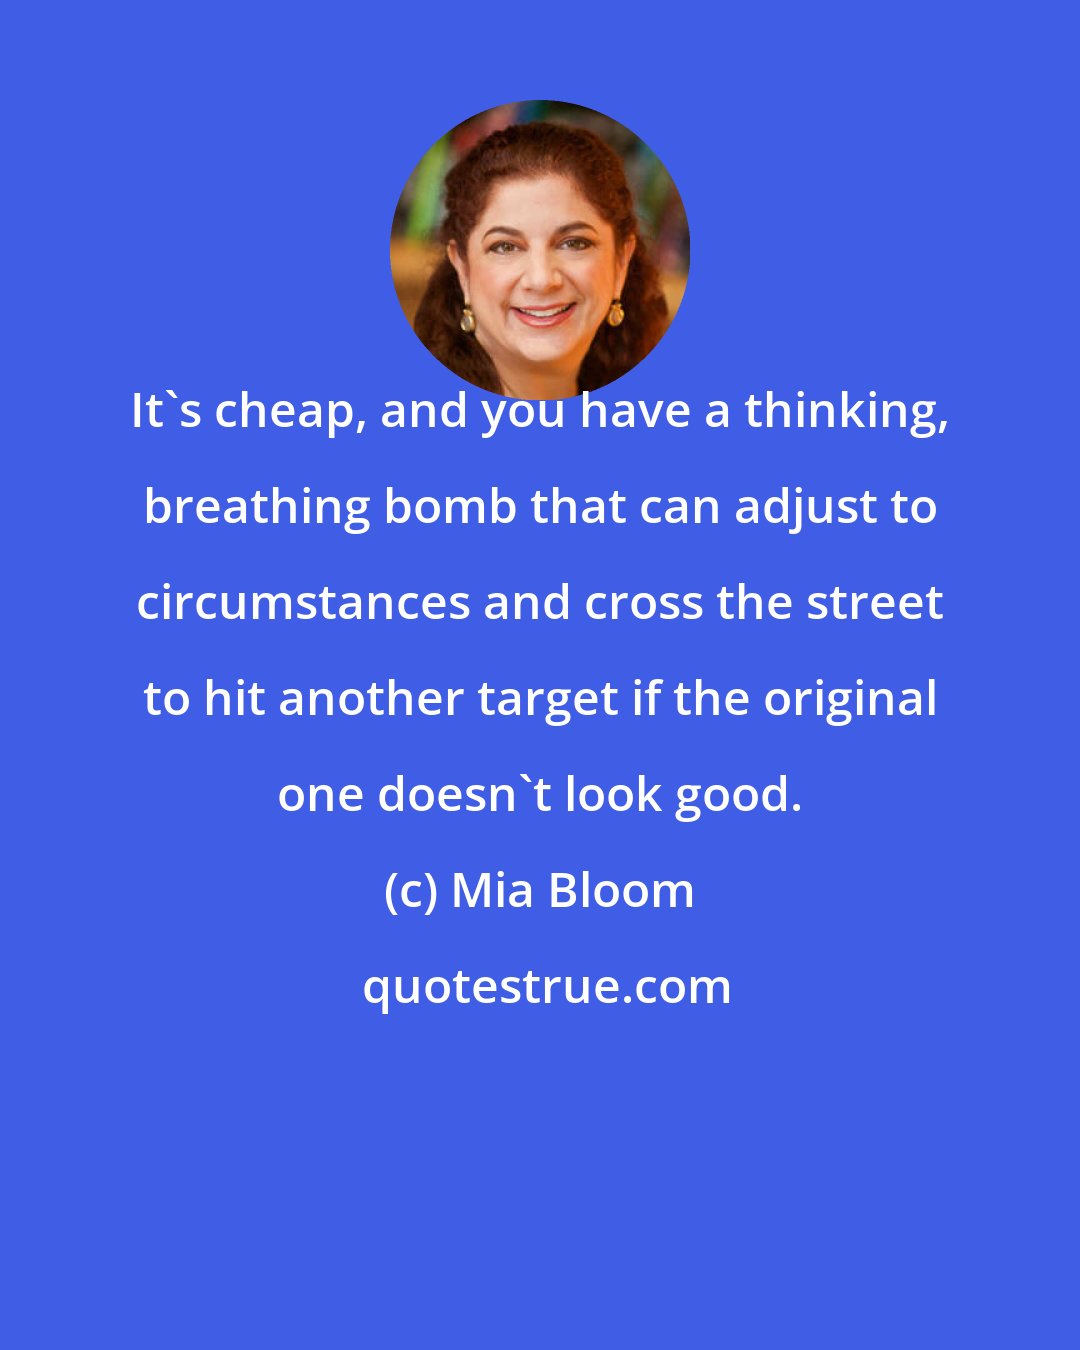 Mia Bloom: It's cheap, and you have a thinking, breathing bomb that can adjust to circumstances and cross the street to hit another target if the original one doesn't look good.